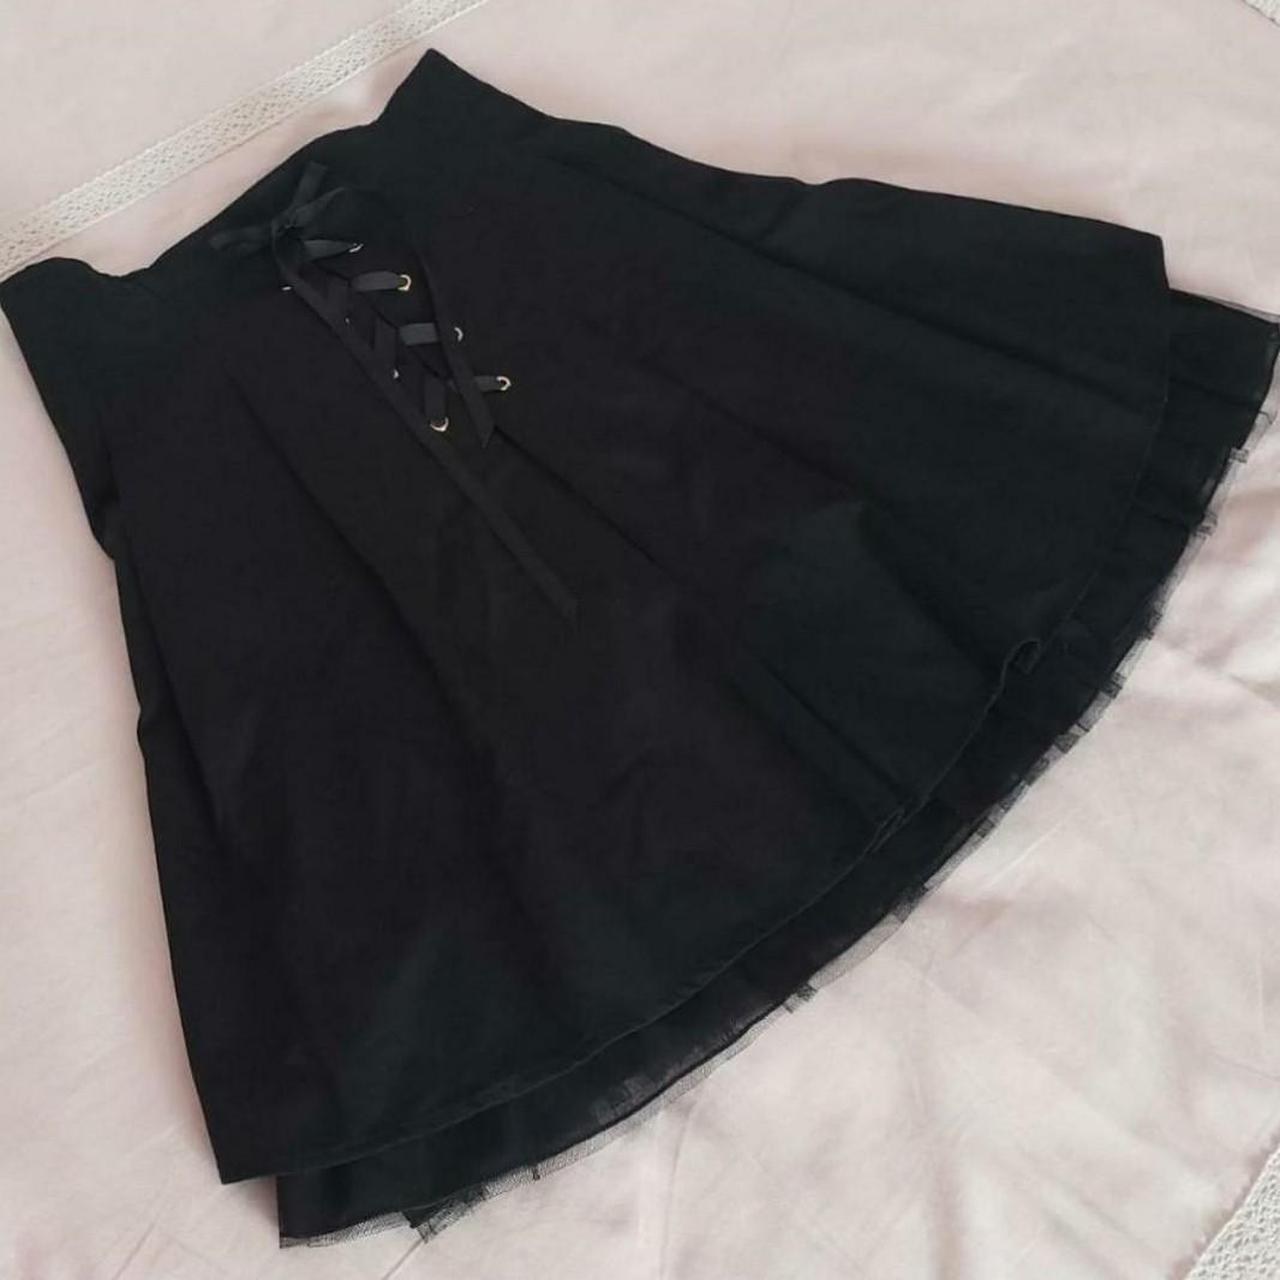 Elegant black pleated skirt adorned with a bow and... - Depop